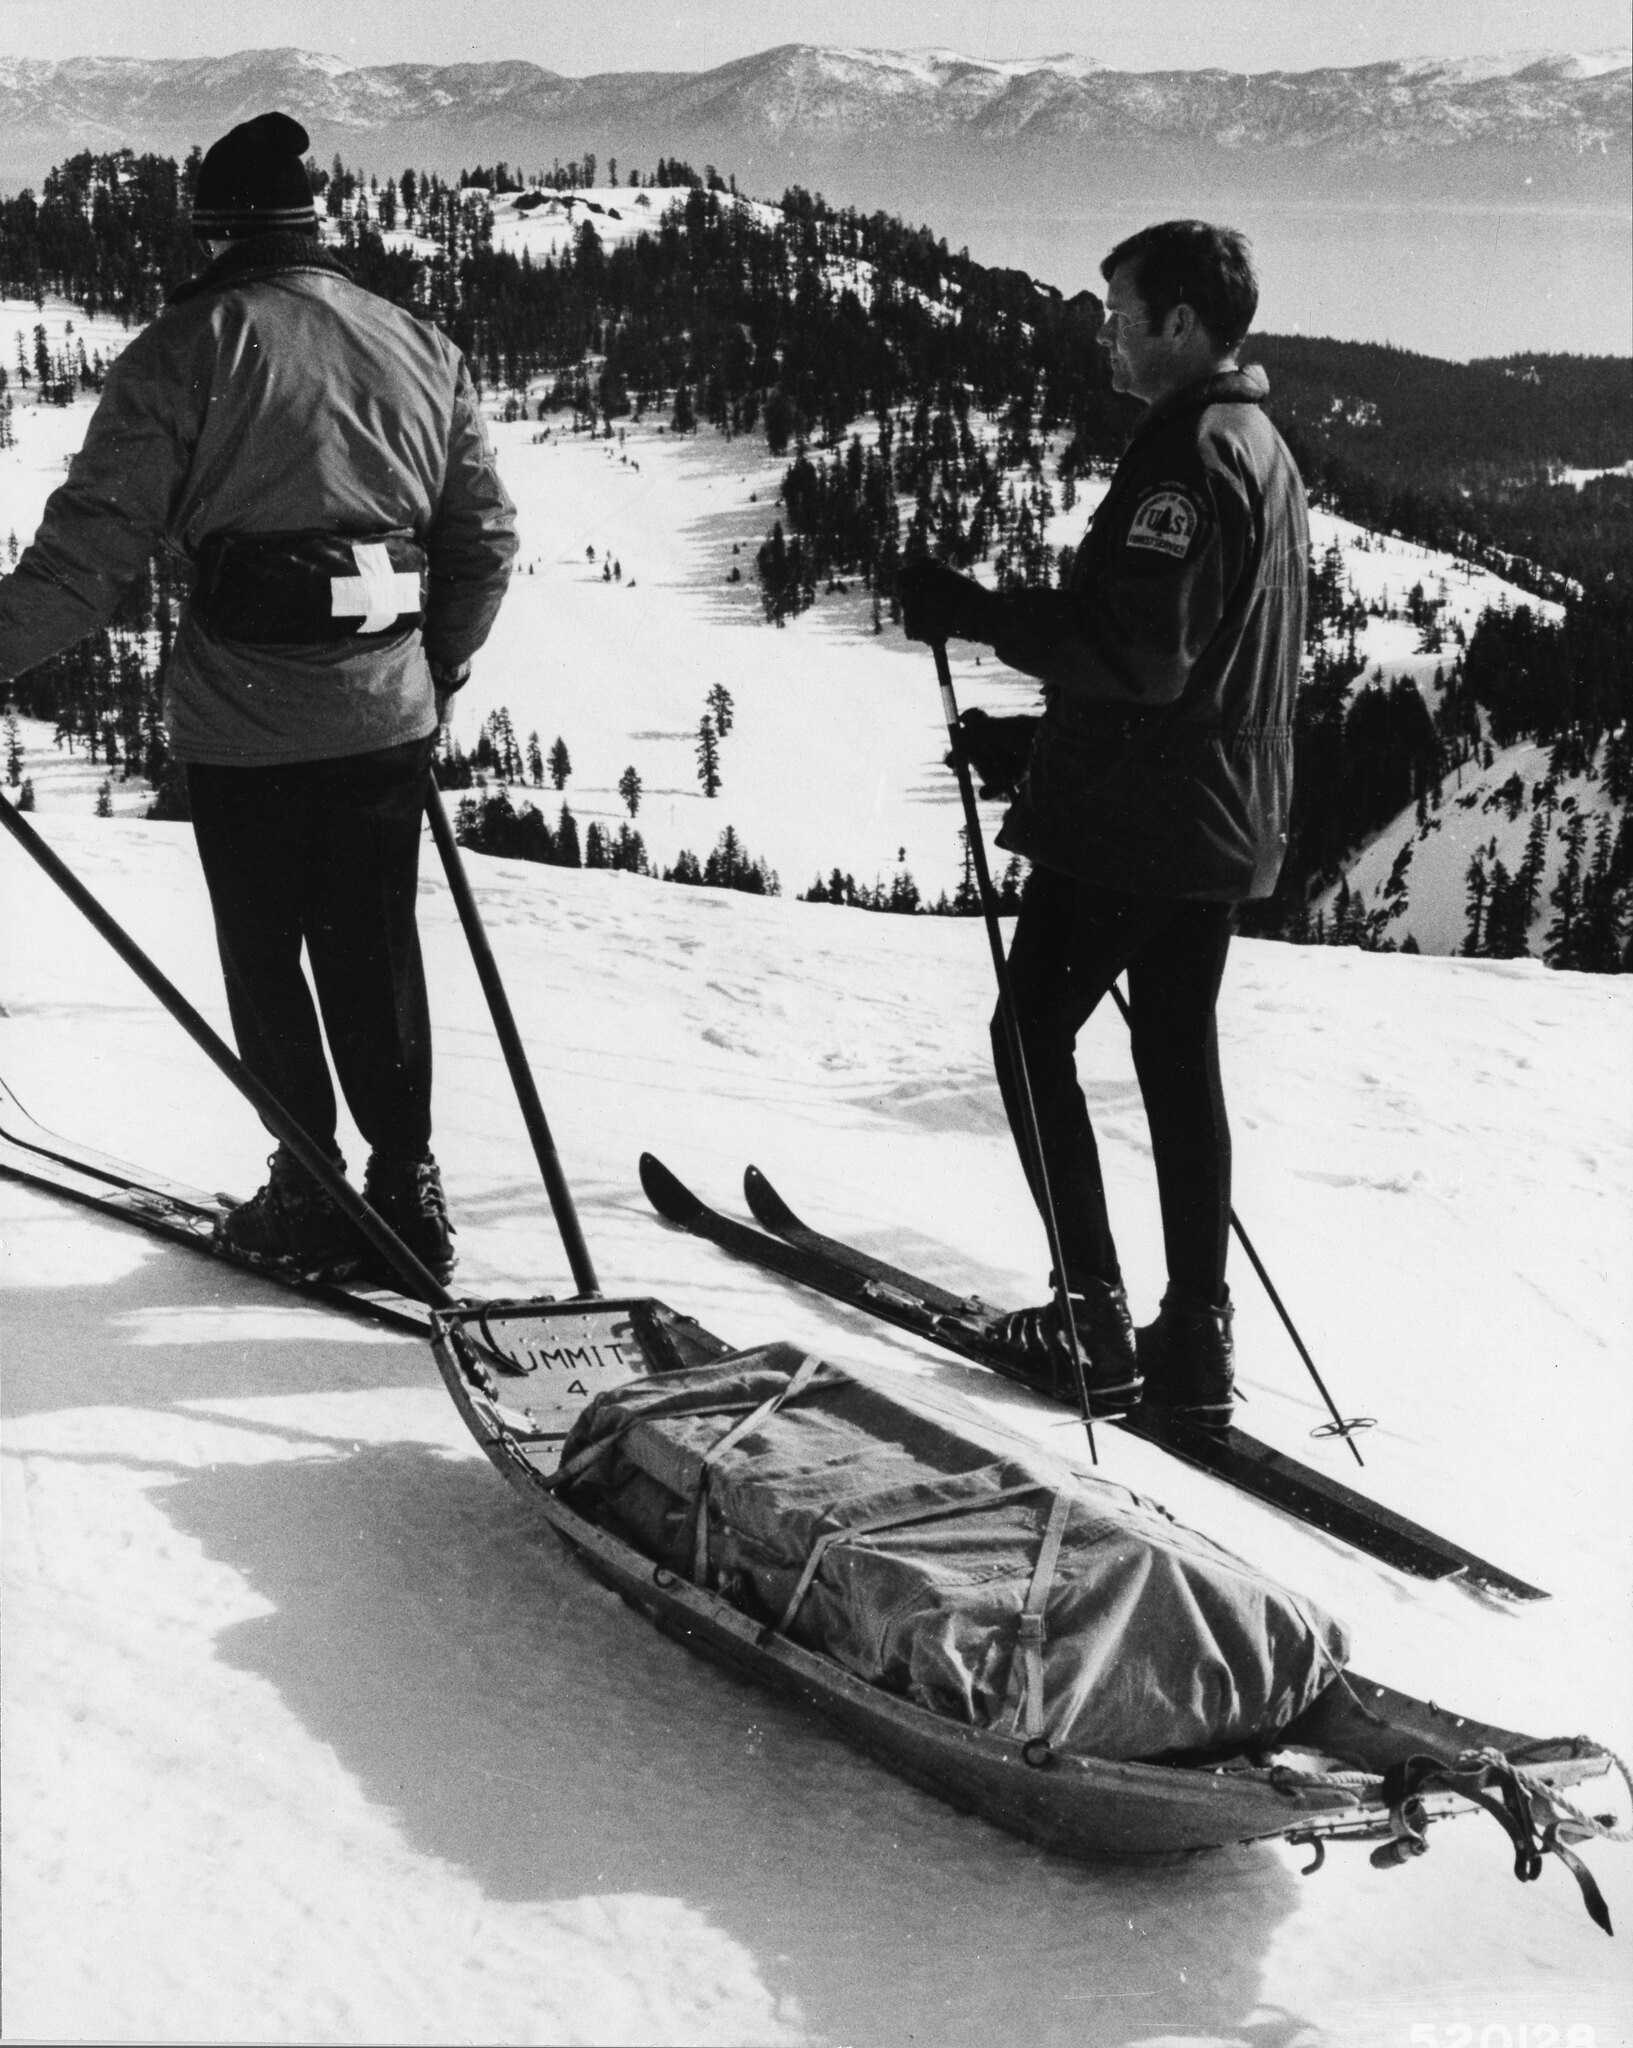 A black and white photo of two skiers